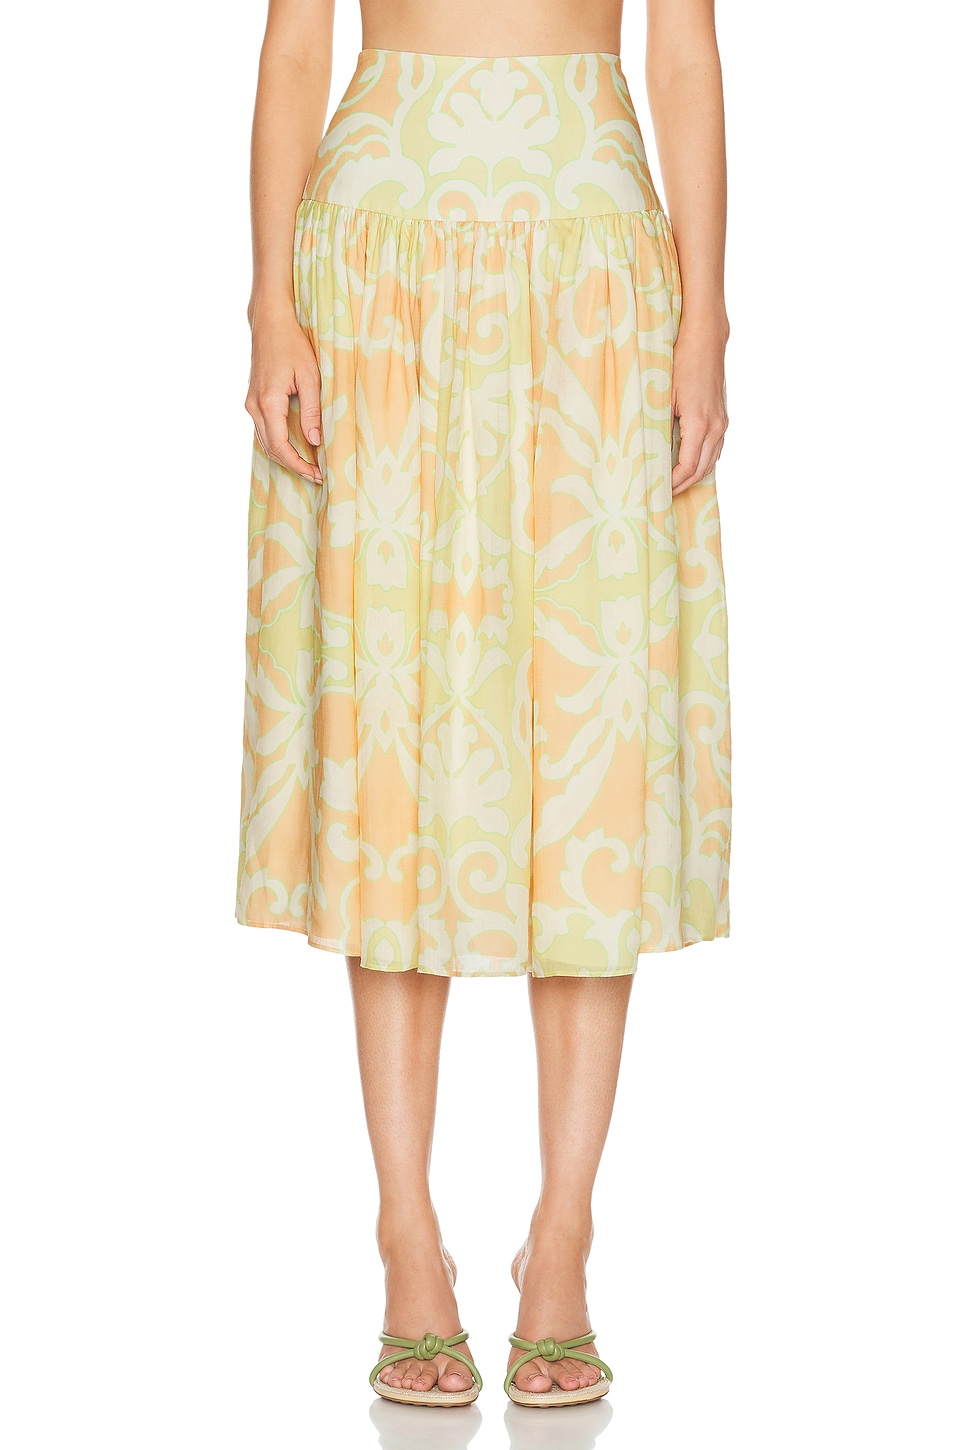 Image 1 of Alexis Maeve Skirt in Melon Vine